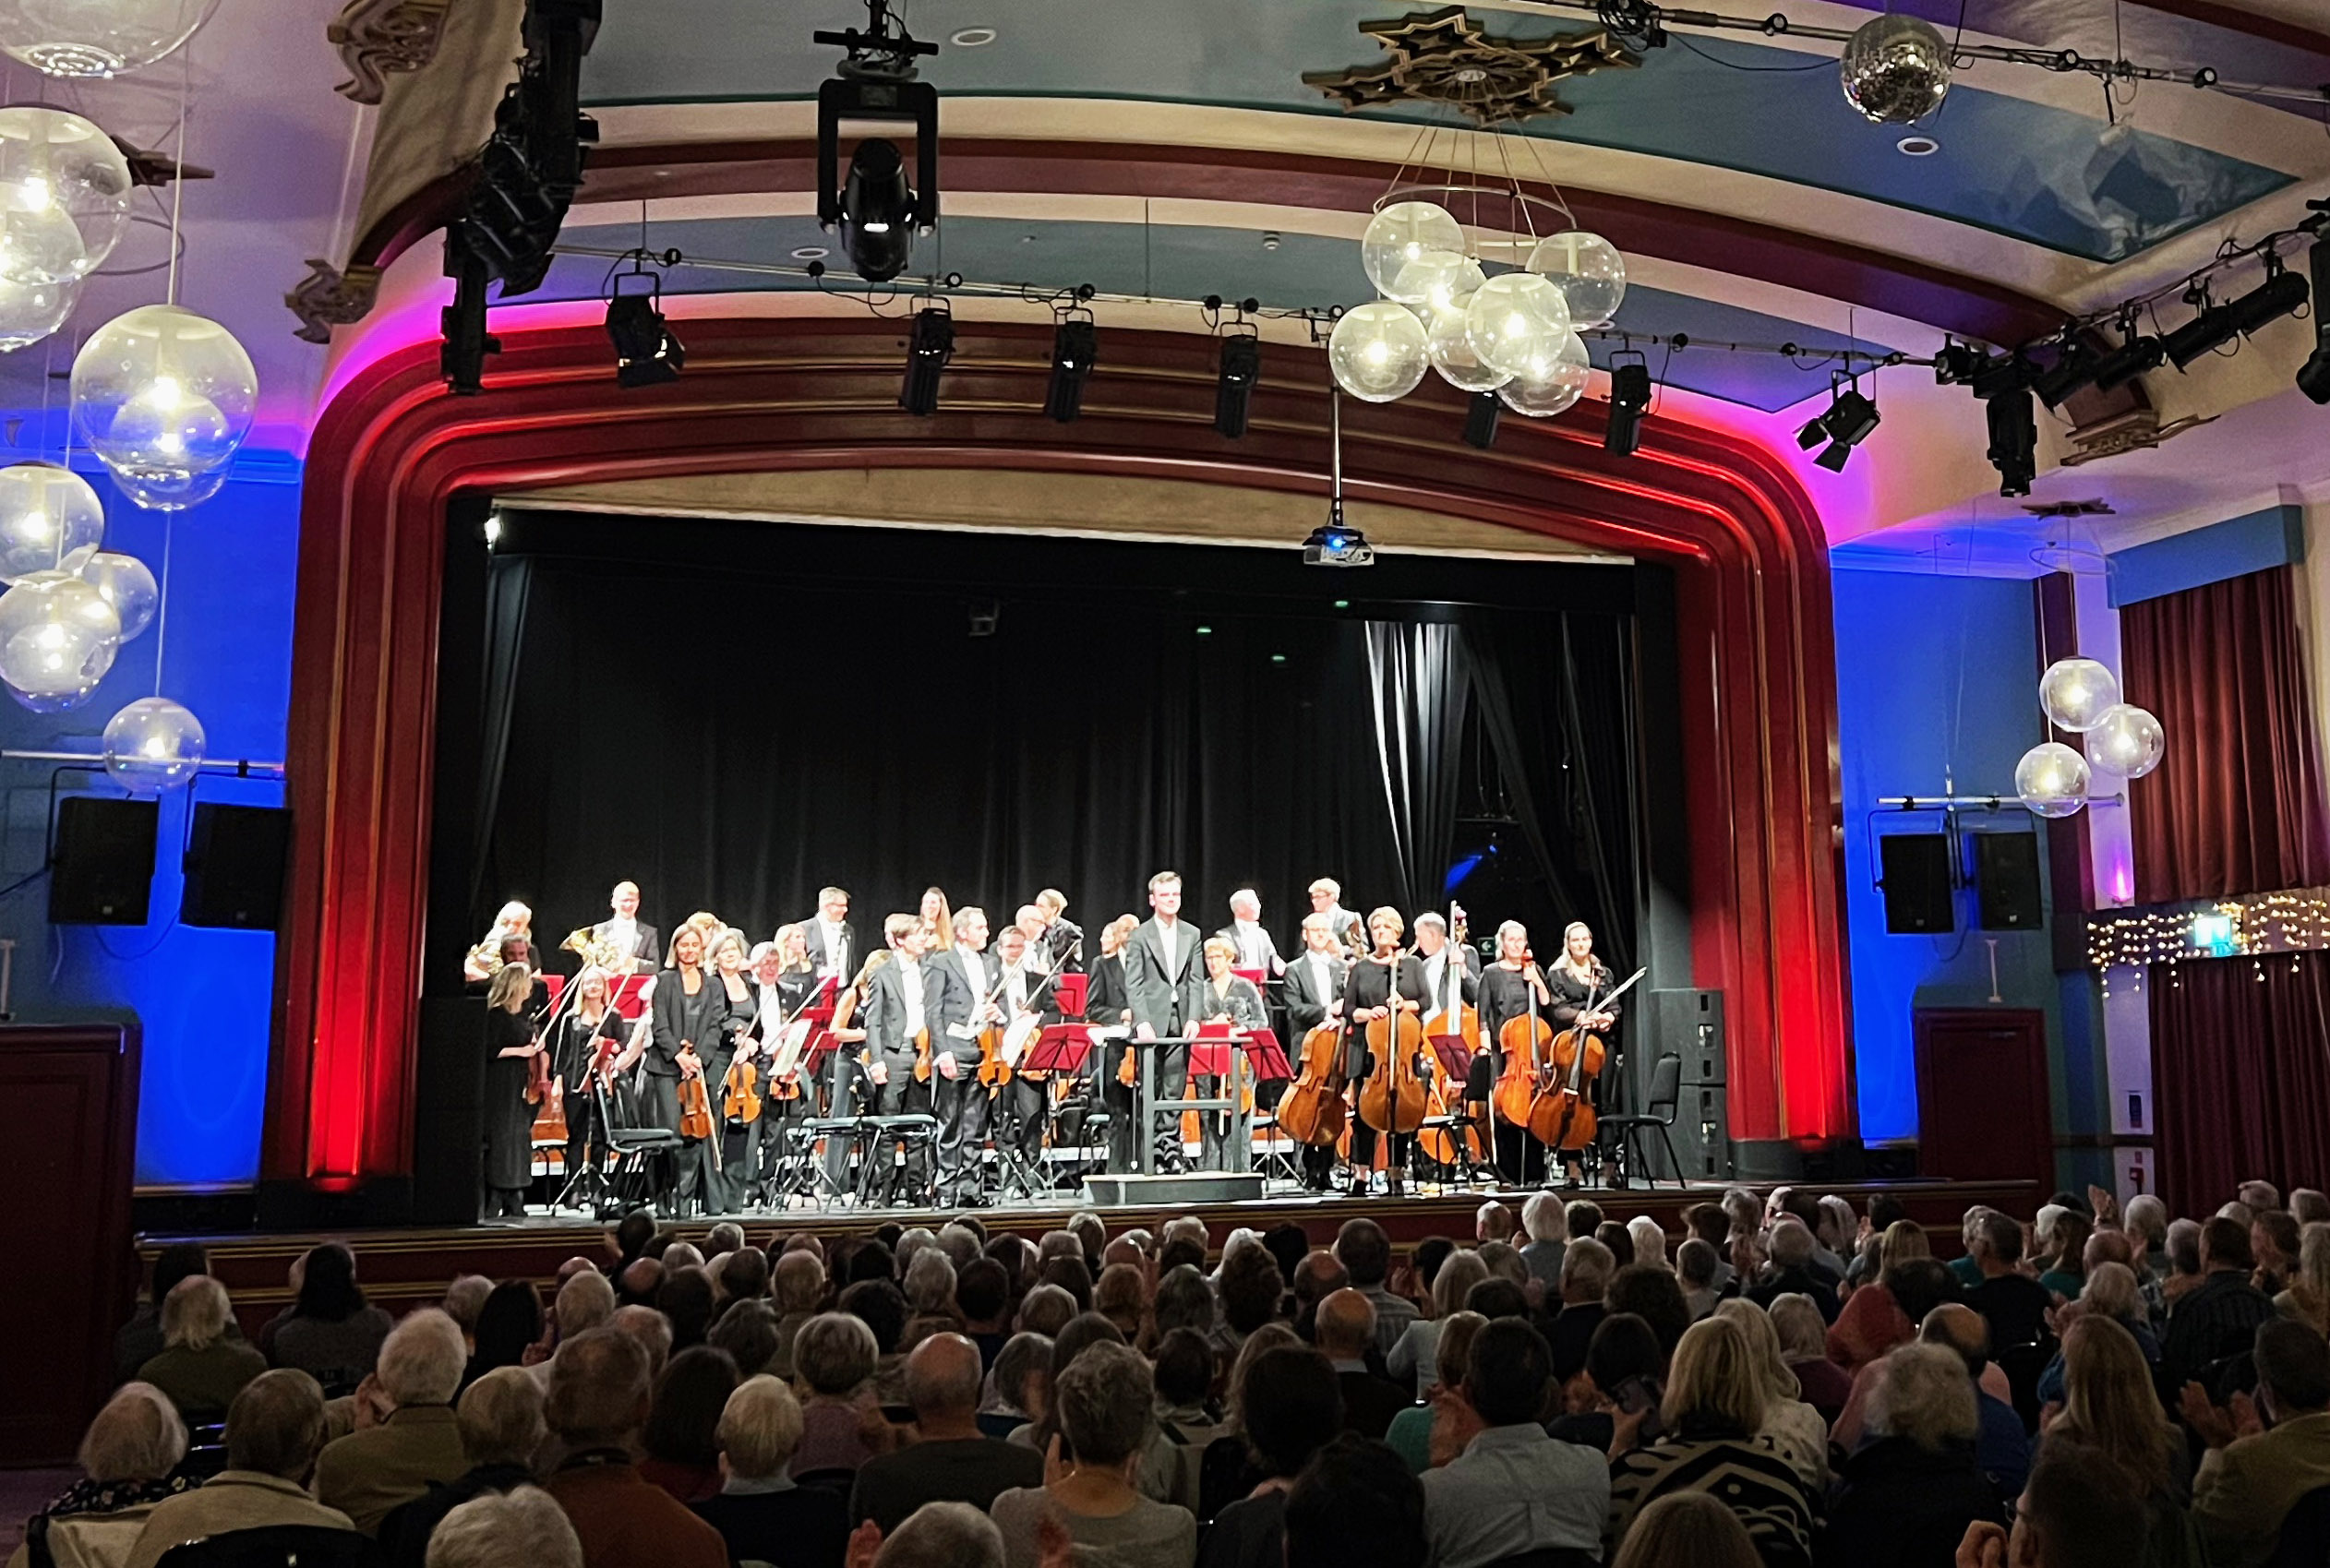 The Orchestra and conductor Tom Fetherstonhaugh at Exmouth Pavilion